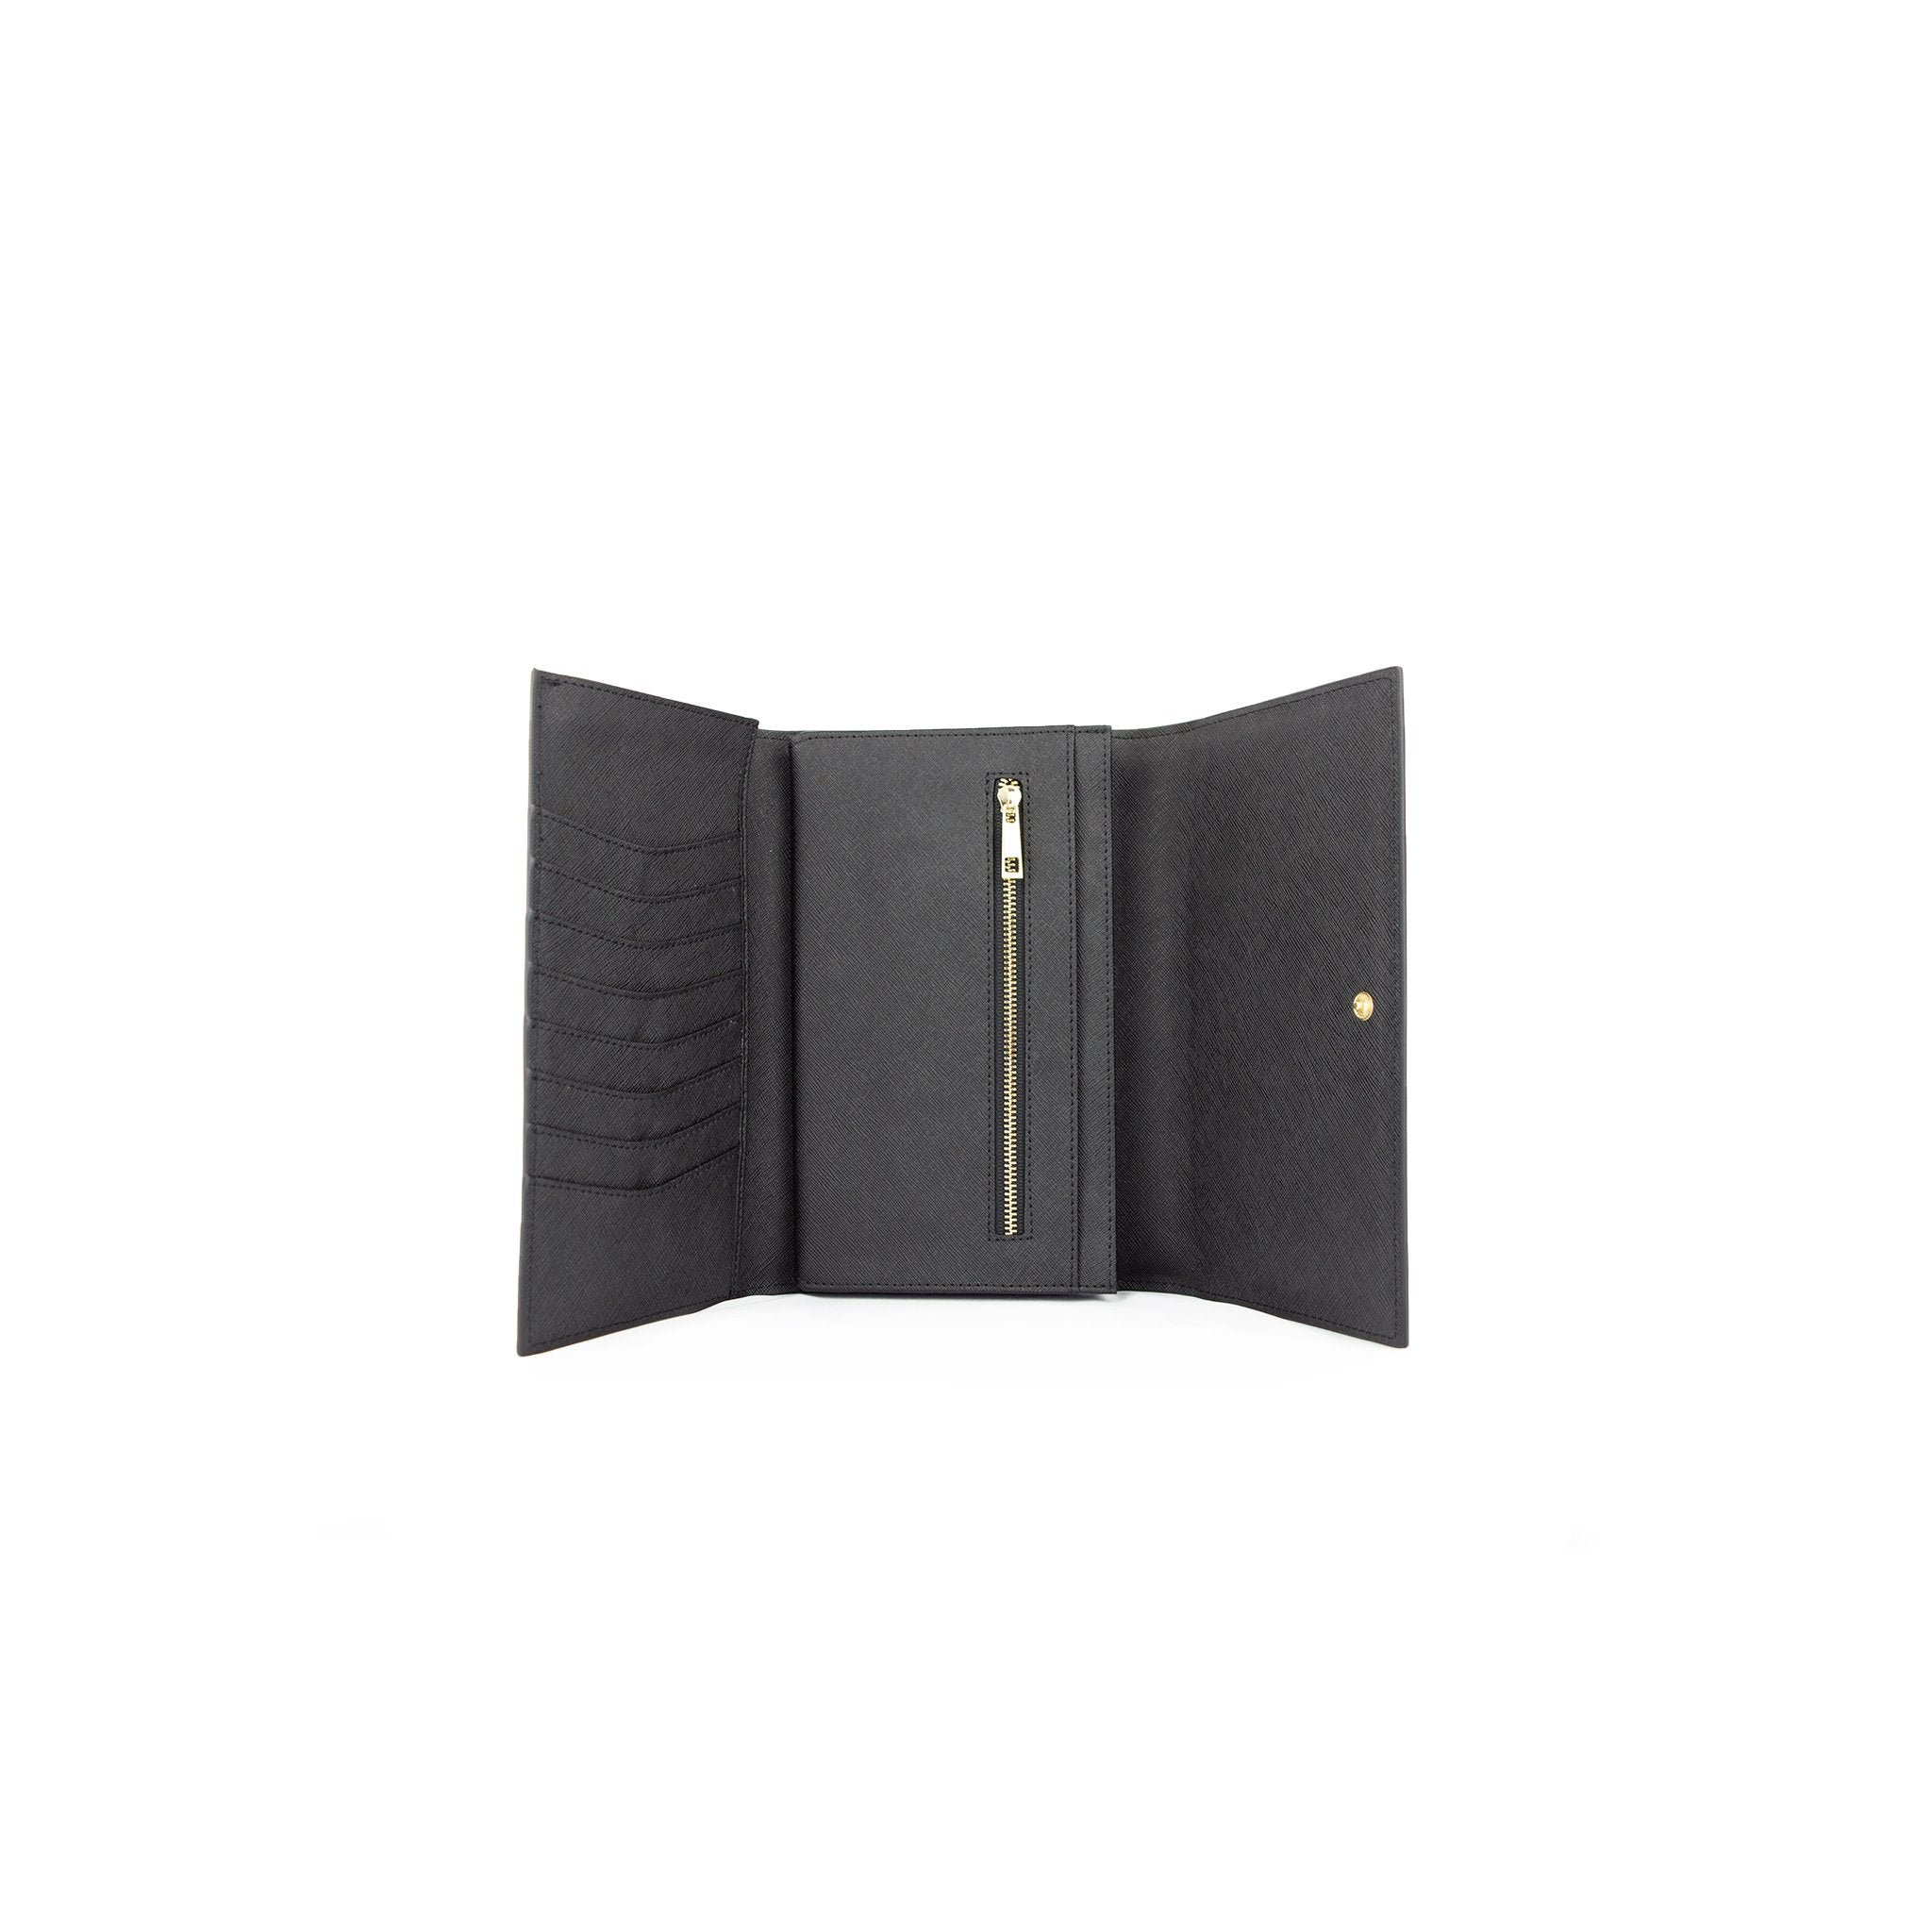 Personalised Wallet Clutch - Black Saffiano Leather